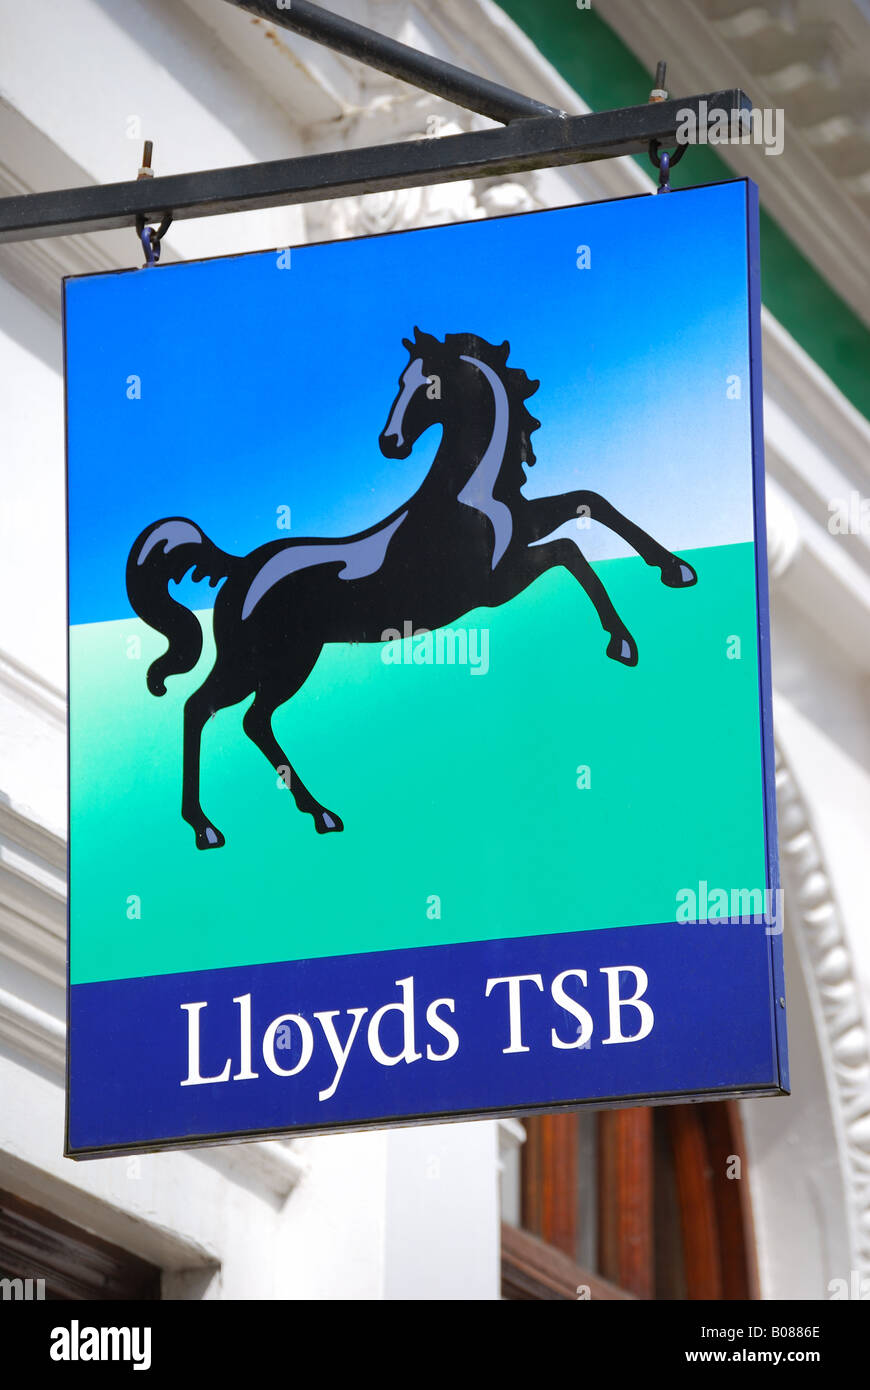 Lloyds TSB Bank signe, High Street, Guildford, Surrey, Angleterre, Royaume-Uni Banque D'Images